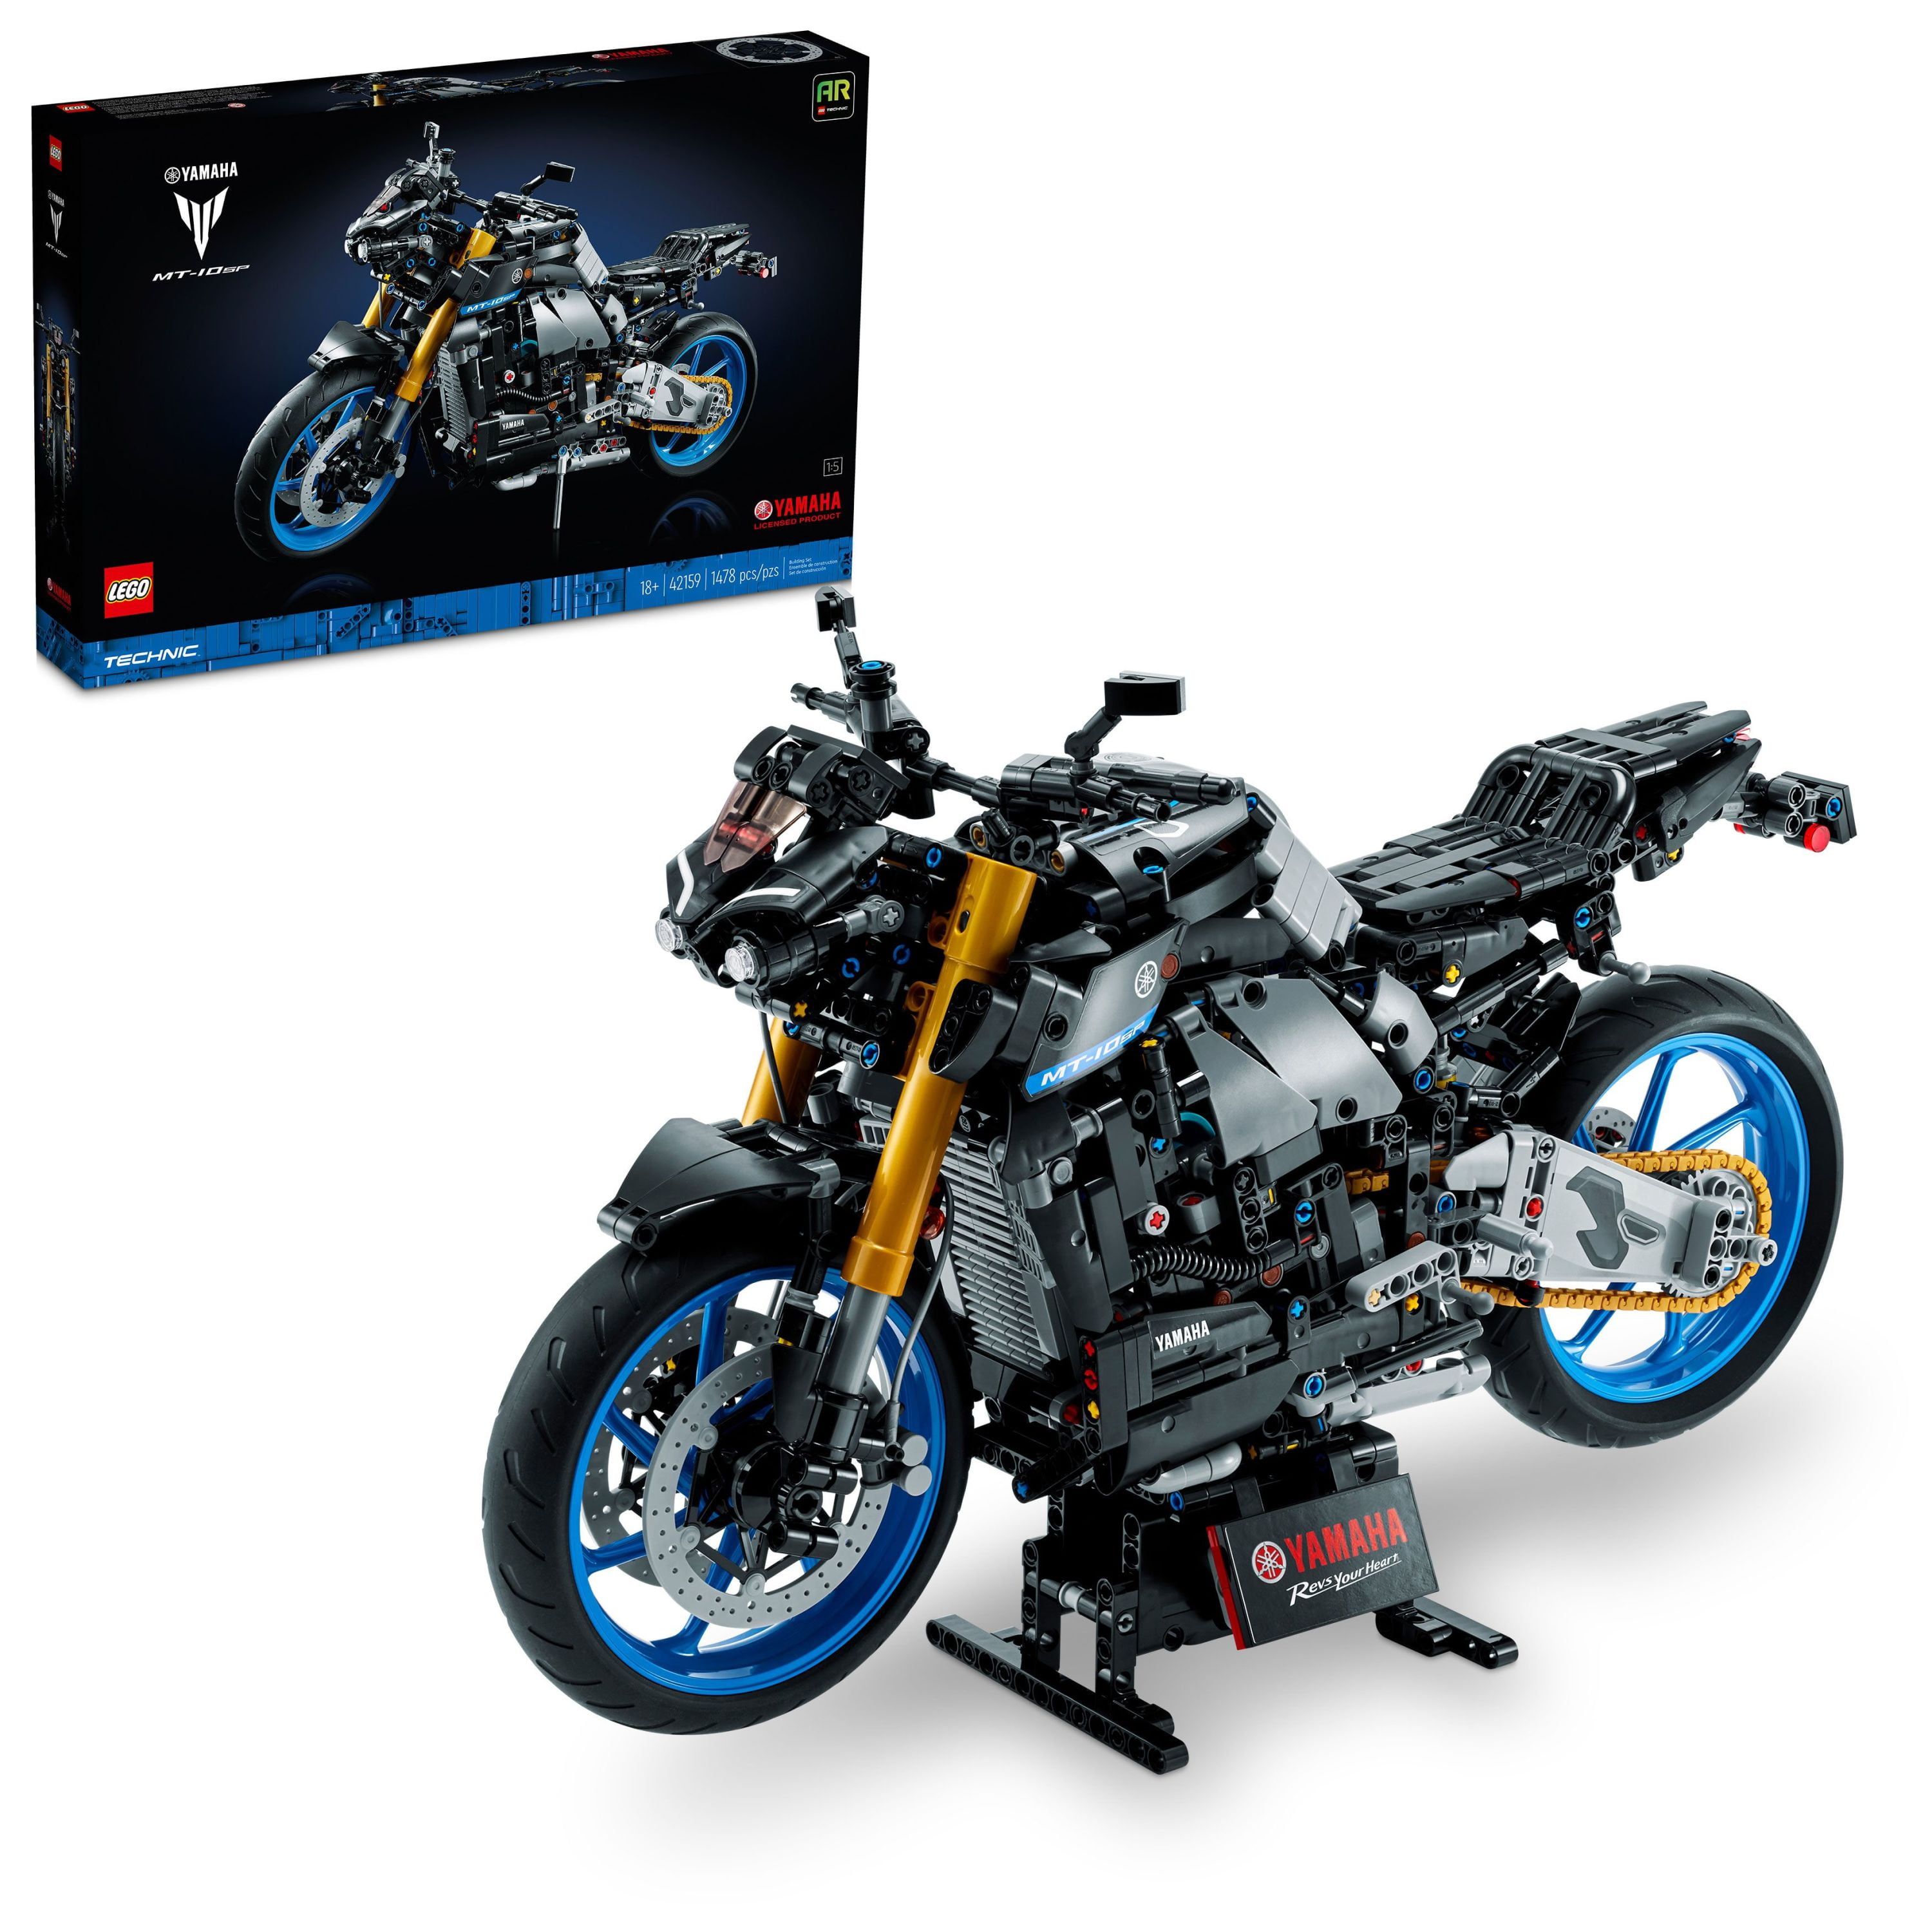 LEGO Technic Yamaha MT-10 SP 42159 Advanced Building Set for Adults, this  Iconic Motorcycle Model for Build and Display Makes a Great Gift for Fans  of